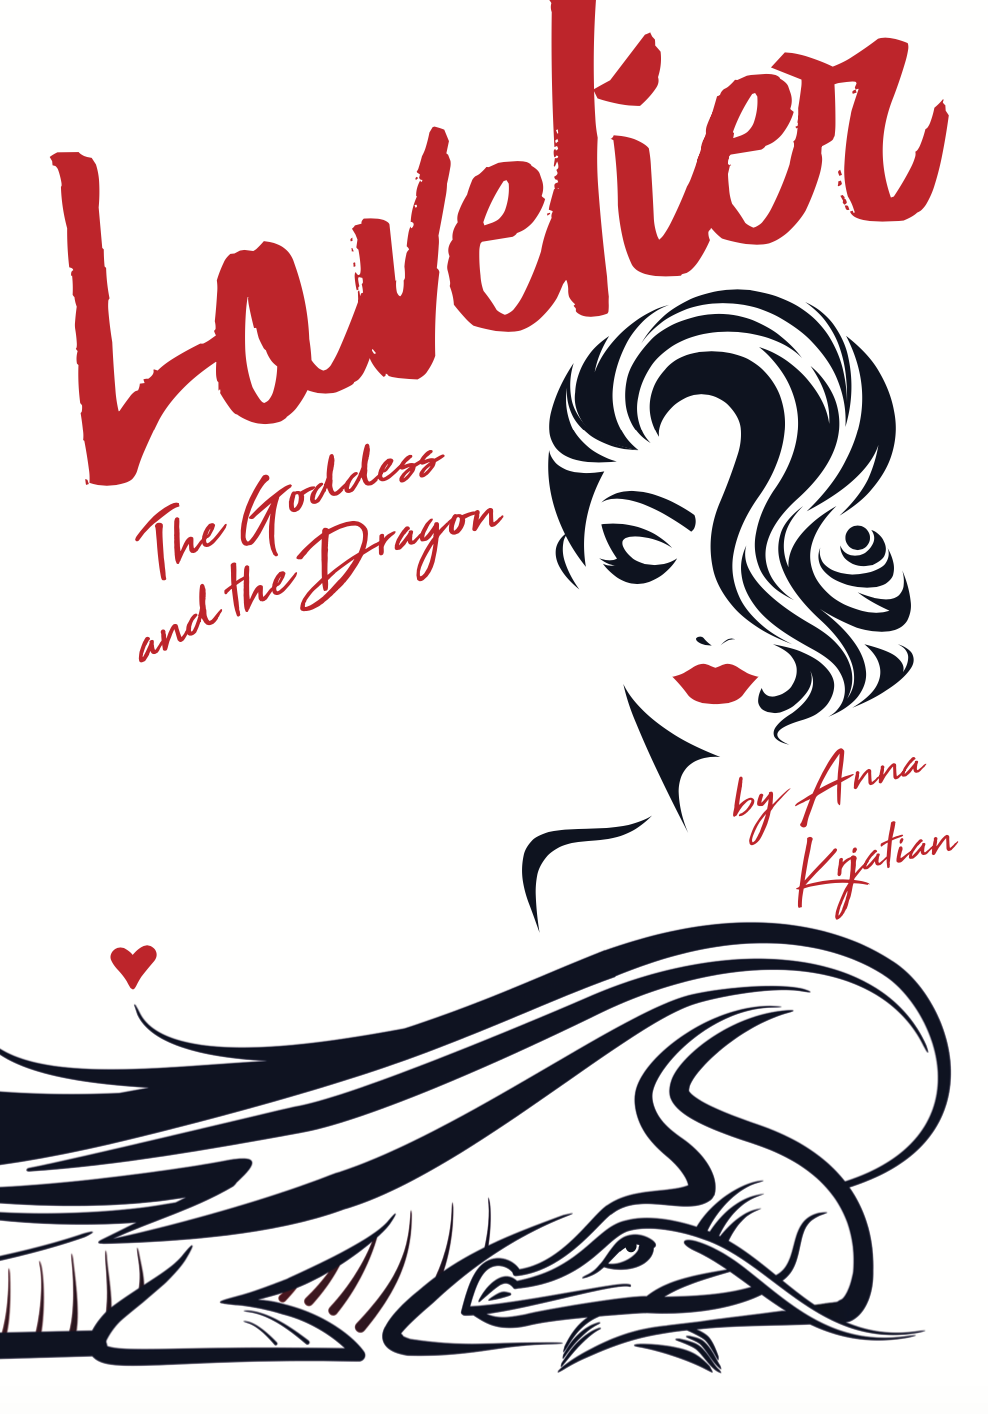 The Cover of the book "Lovelier - The Goddess and The Dragon". A drawing of a women with bright red lipstick, and her hair gathered at the side looking down at a dragon that sits beneath her, looking up. 